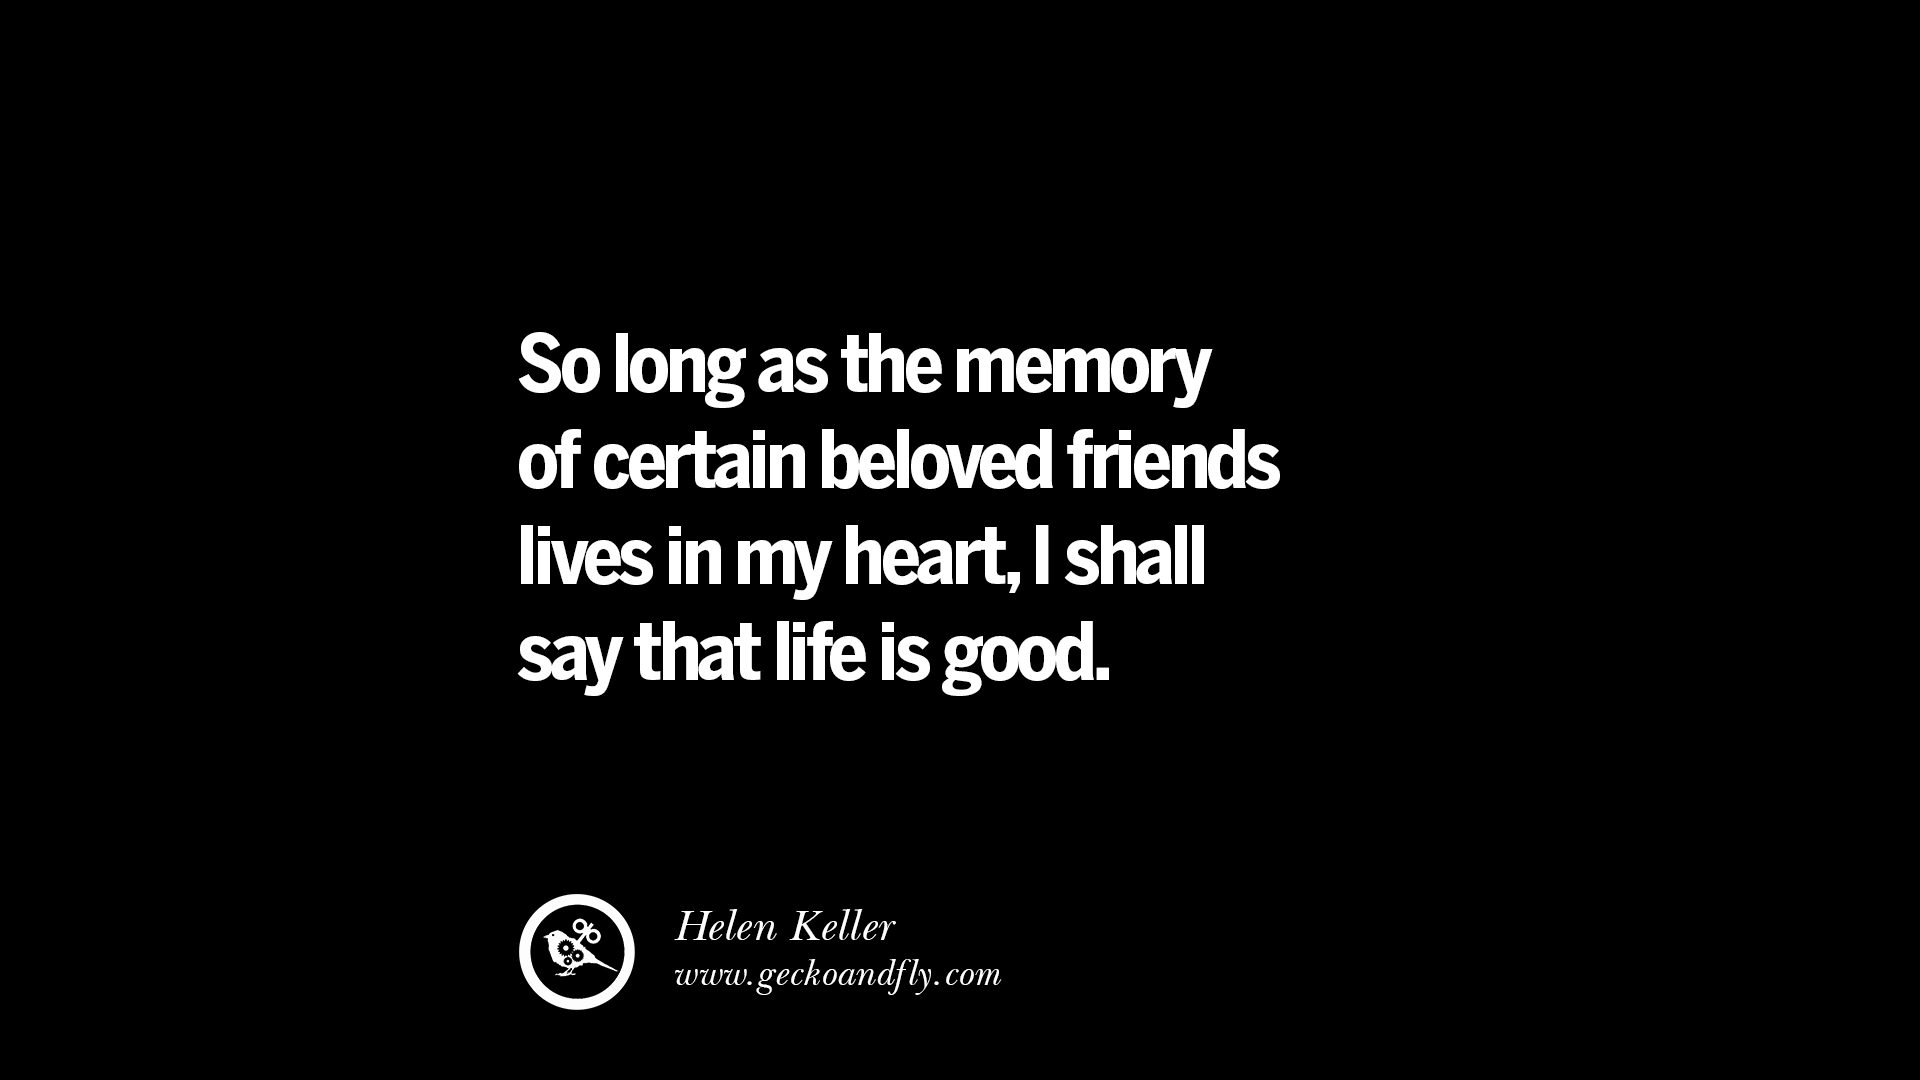 So long as the memory of certain beloved friends lives in my heart I shall say that life is good – Helen Keller quotes about friendship love